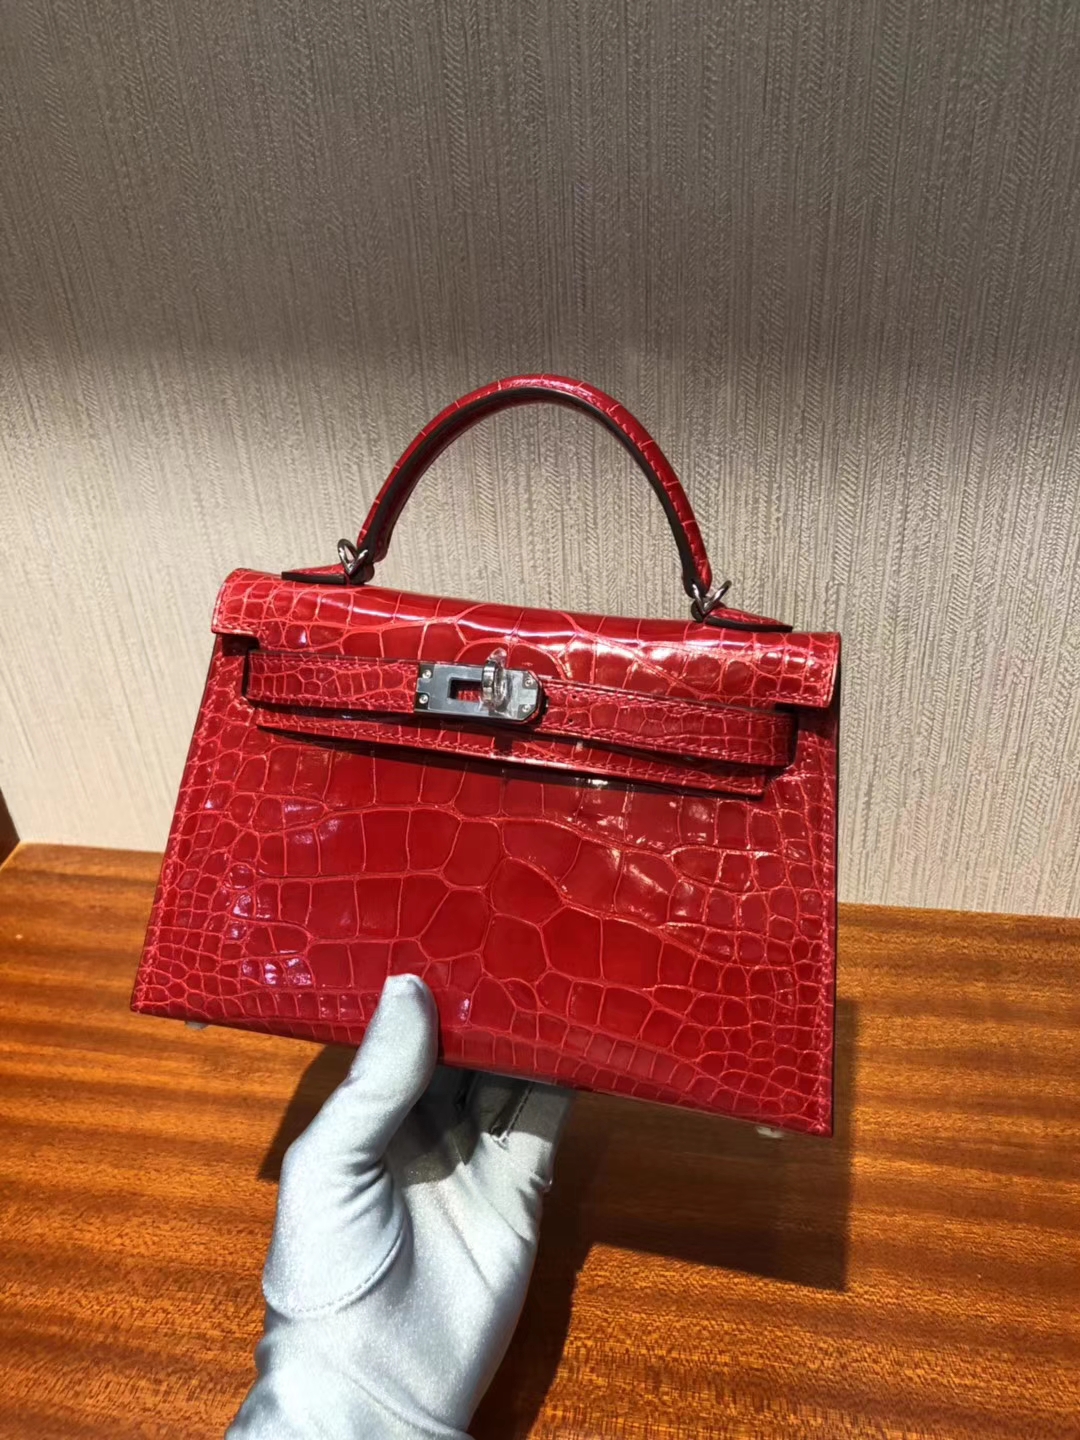 Pretty Hermes Shiny Crocodile Minikelly-2 Evening Bag in CK95 Braise Silver Hardware